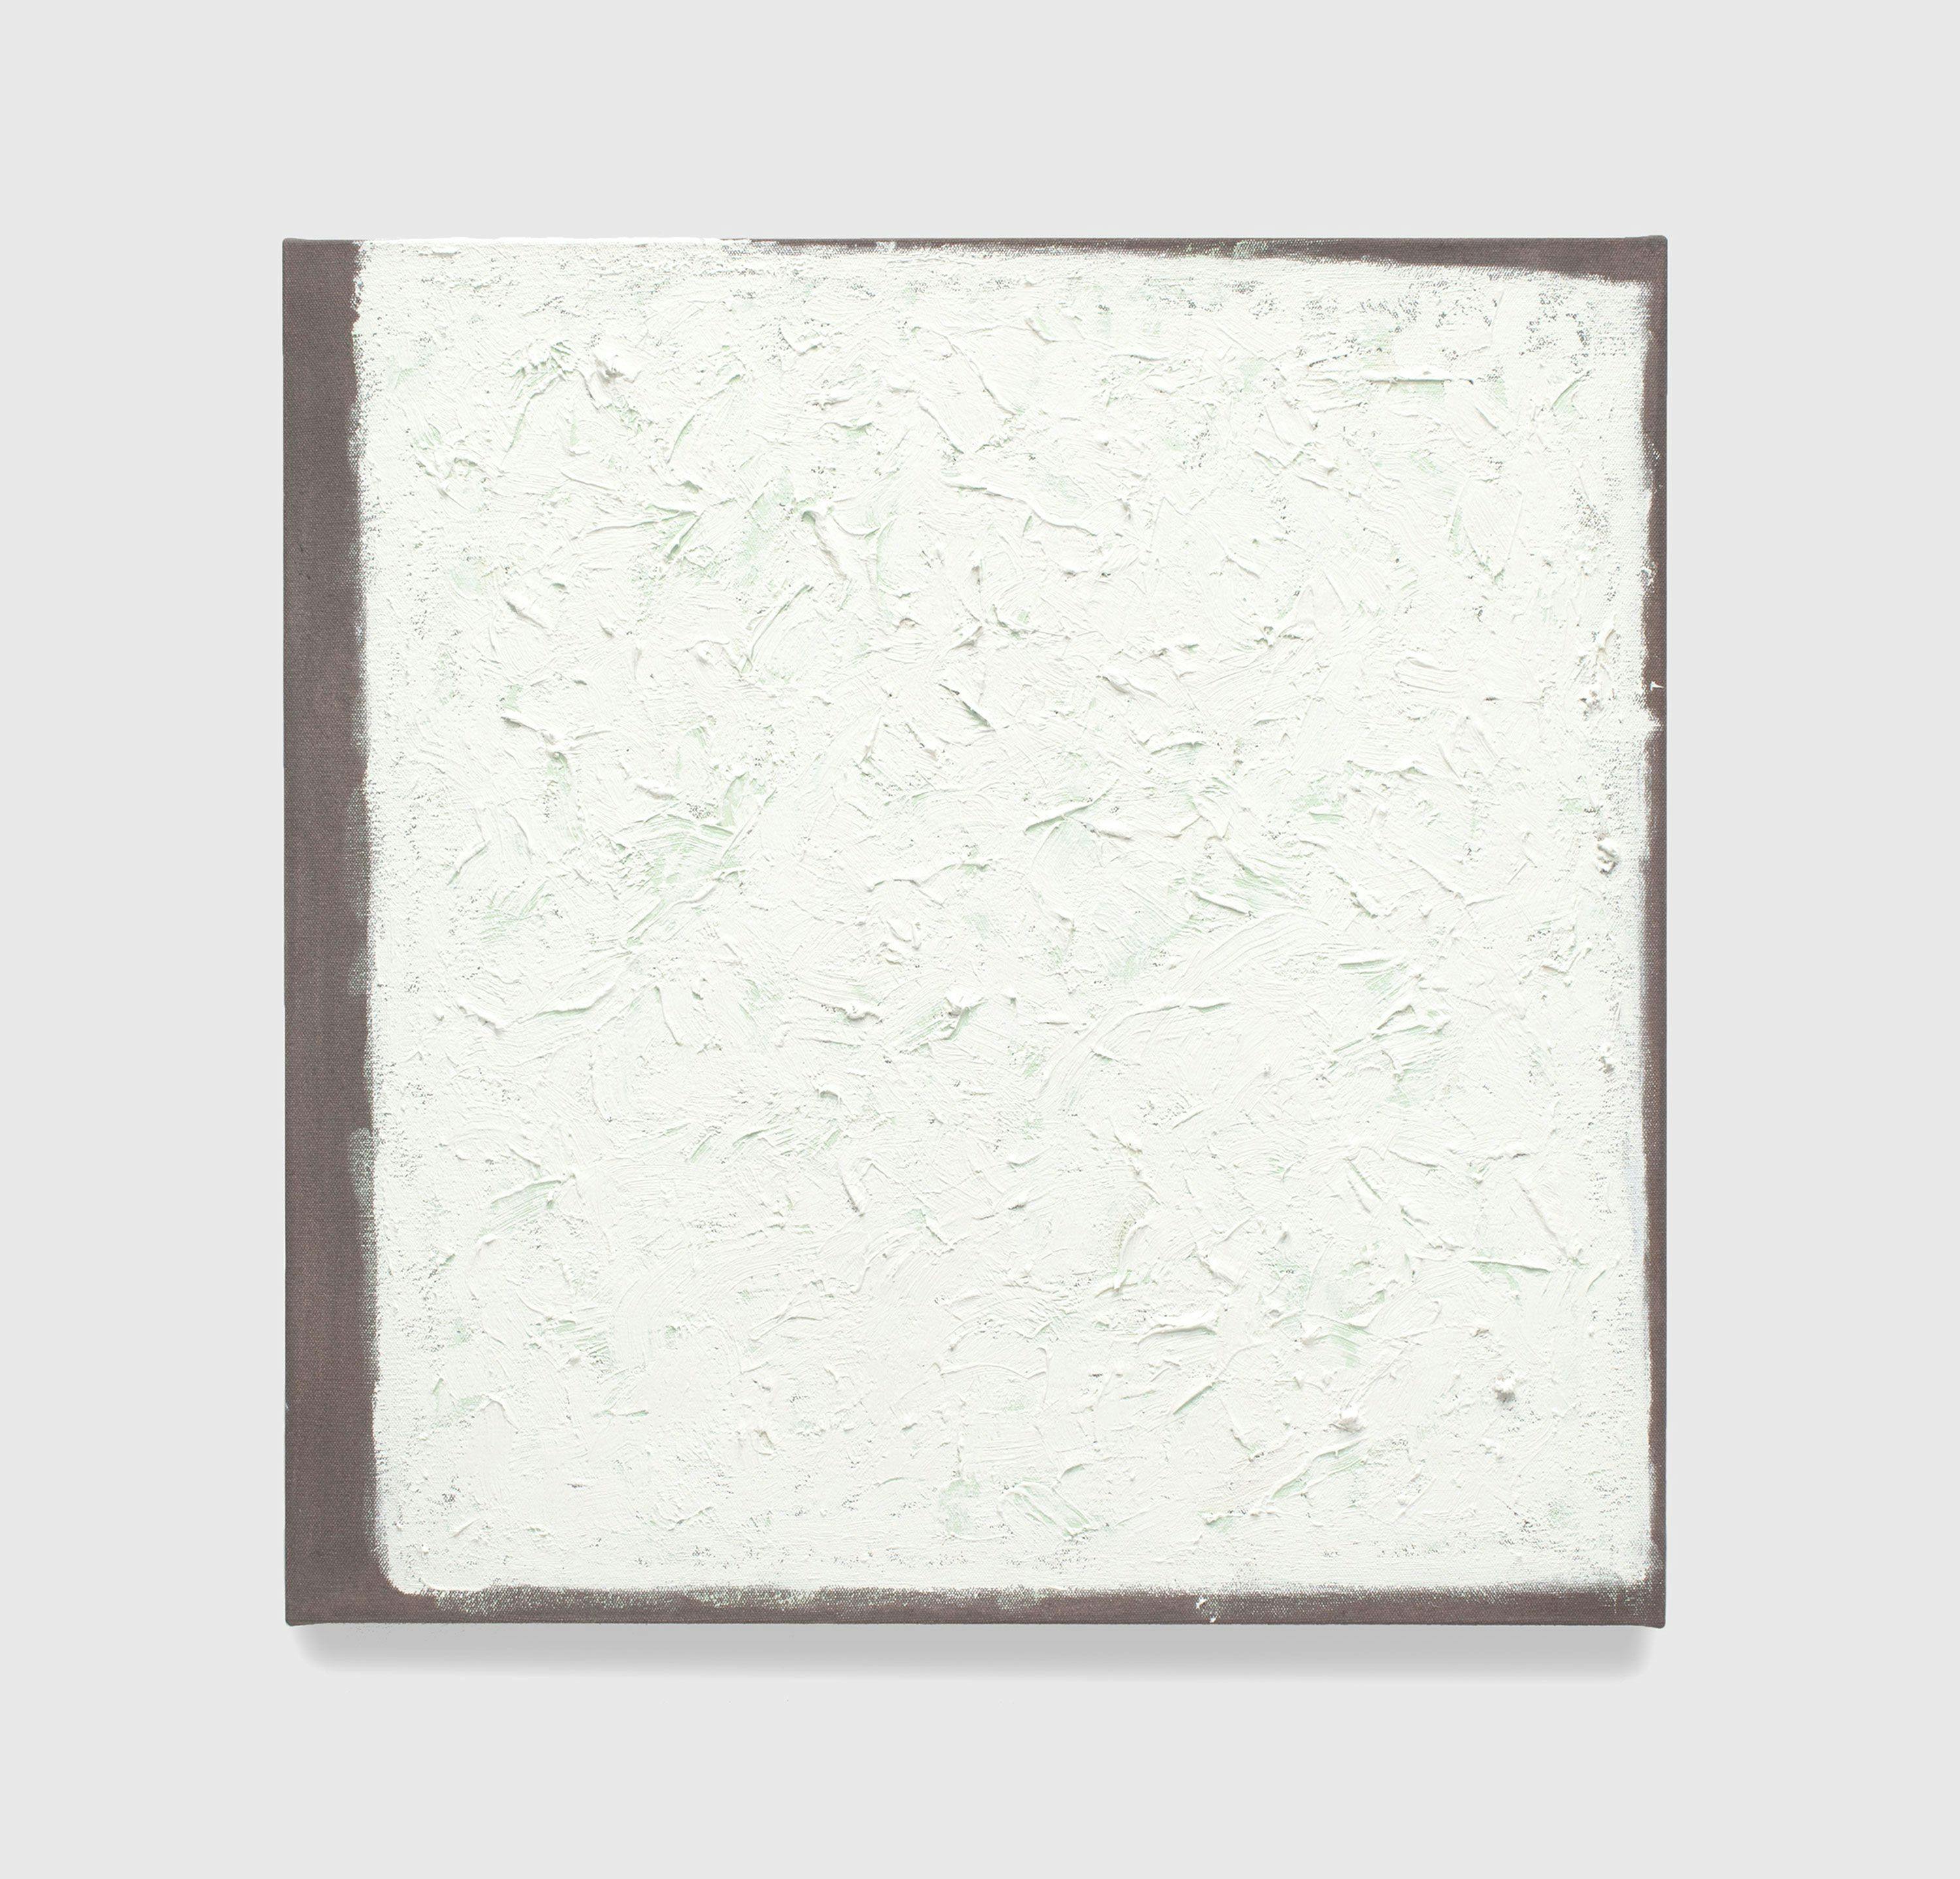 An untitled oil on stretched cotton canvas artwork by Robert Ryman, dated 2011.